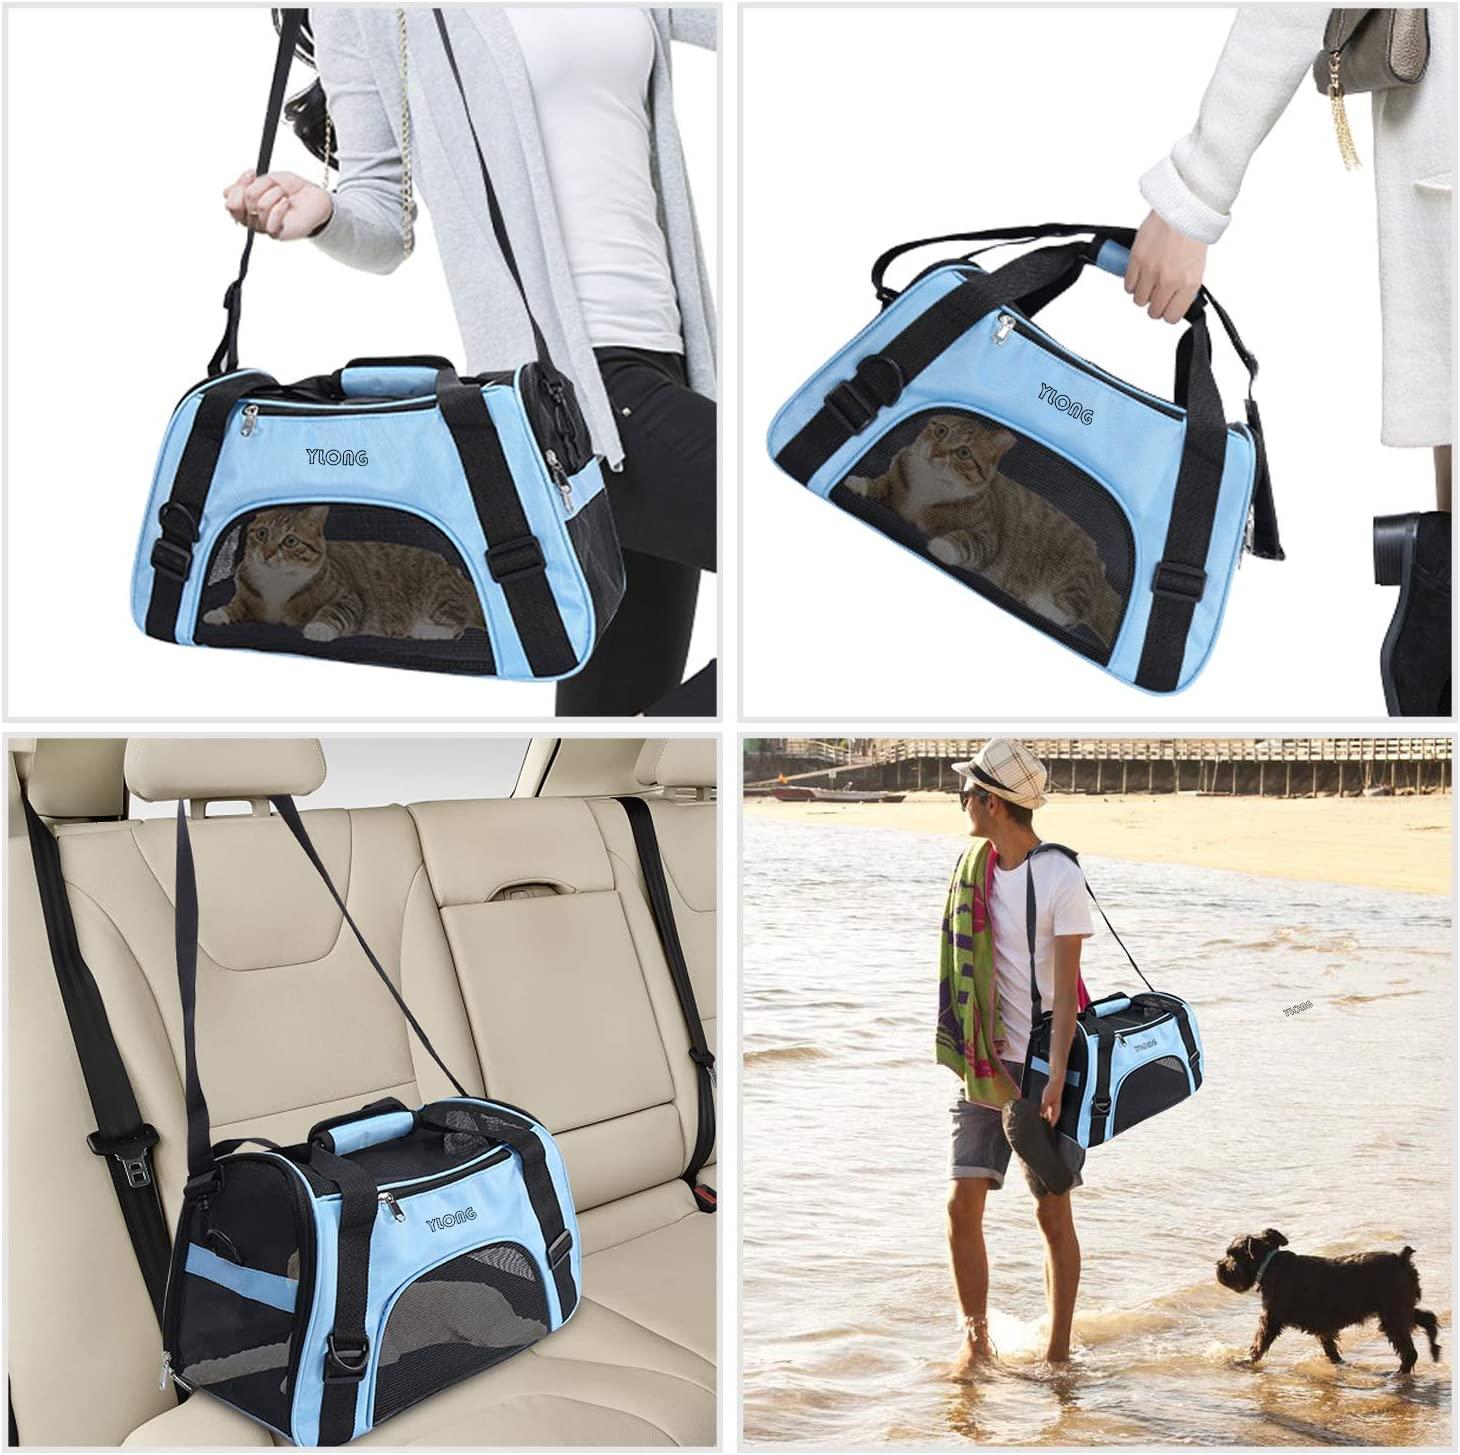 Lufei Ultra-Light Pet Carrier, Soft Sided And Foldable Travel Carrier With  Front And Top Openings, For Cats And Small Dogs, Blue And White, Large Size